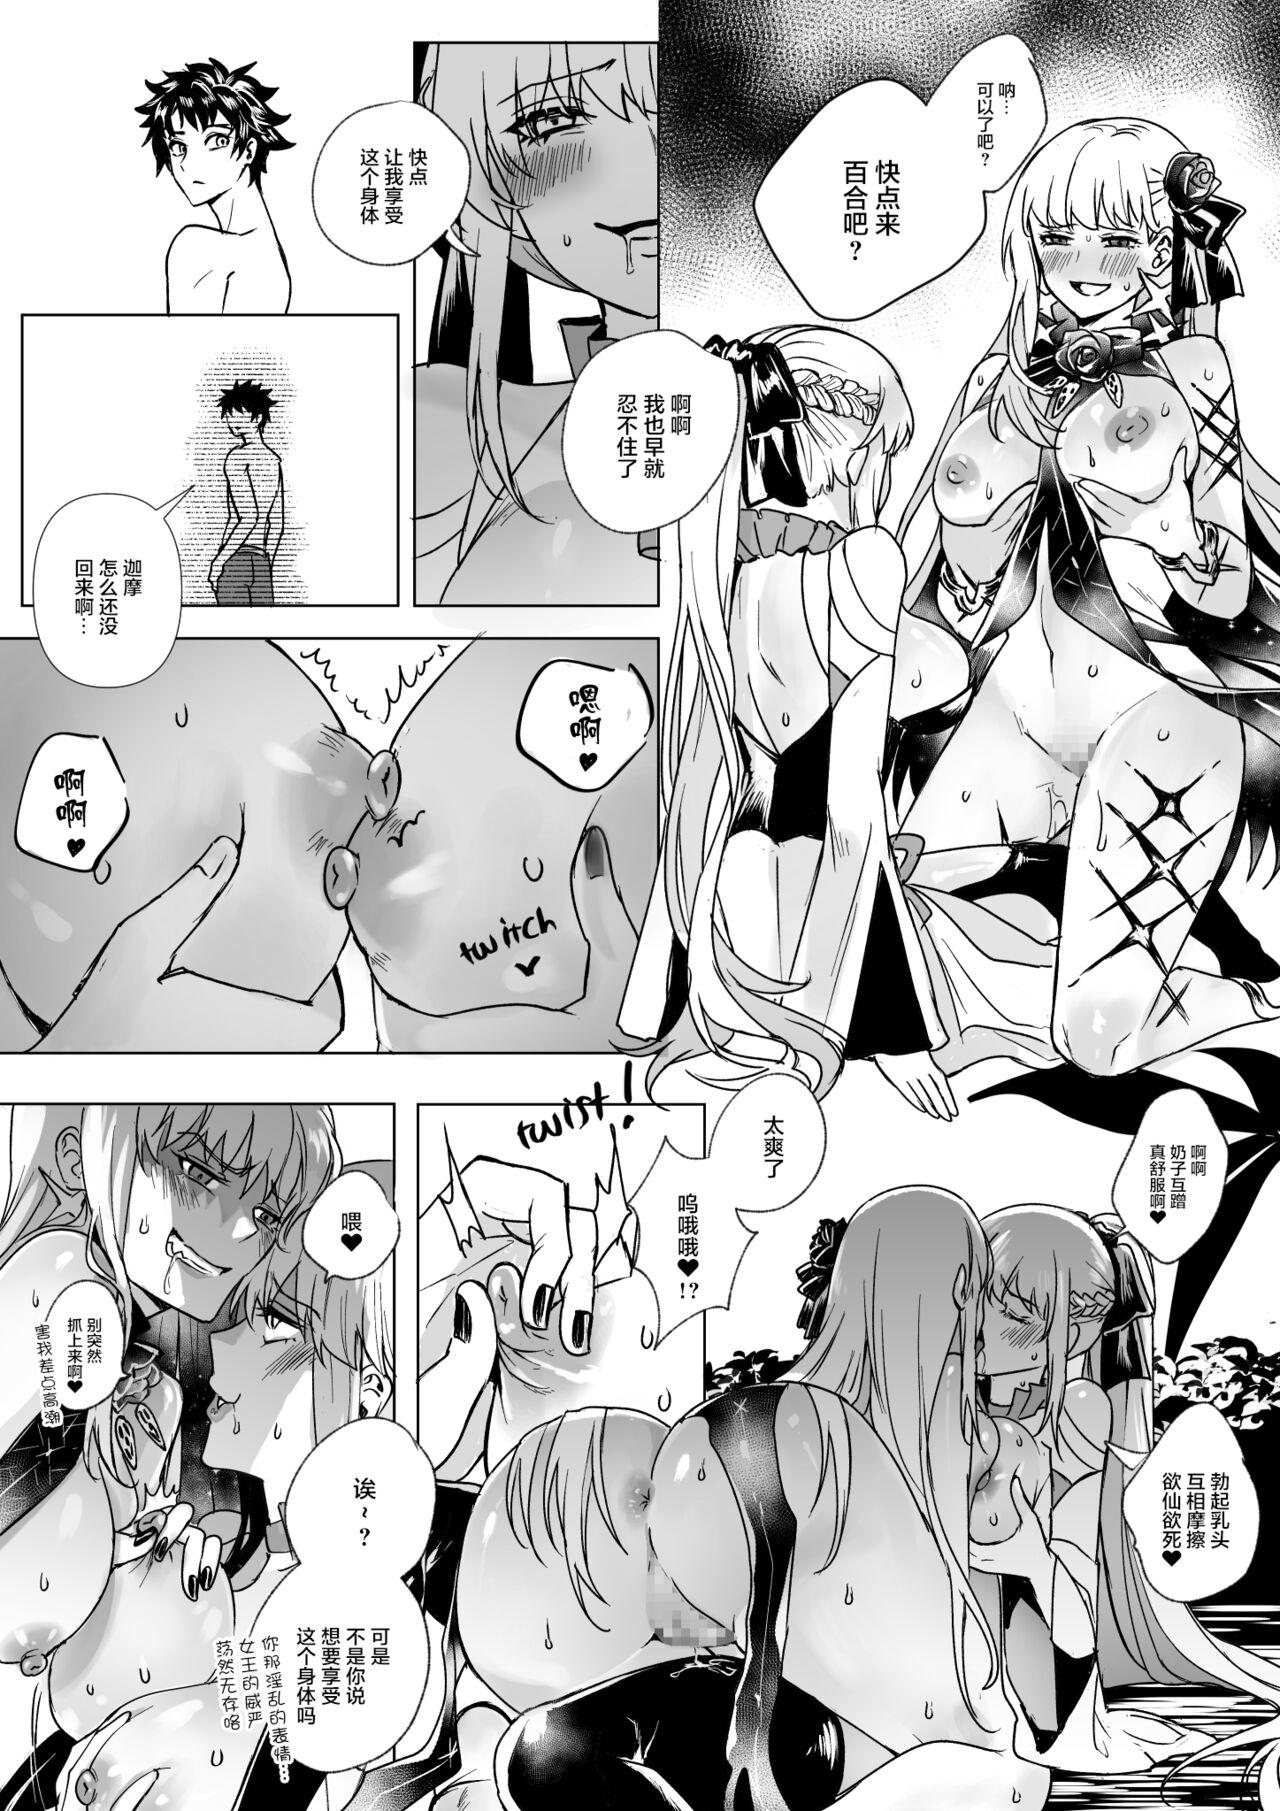 Family Roleplay FGO モルガン&水着カーマ憑依 - Fate grand order Leaked - Page 11